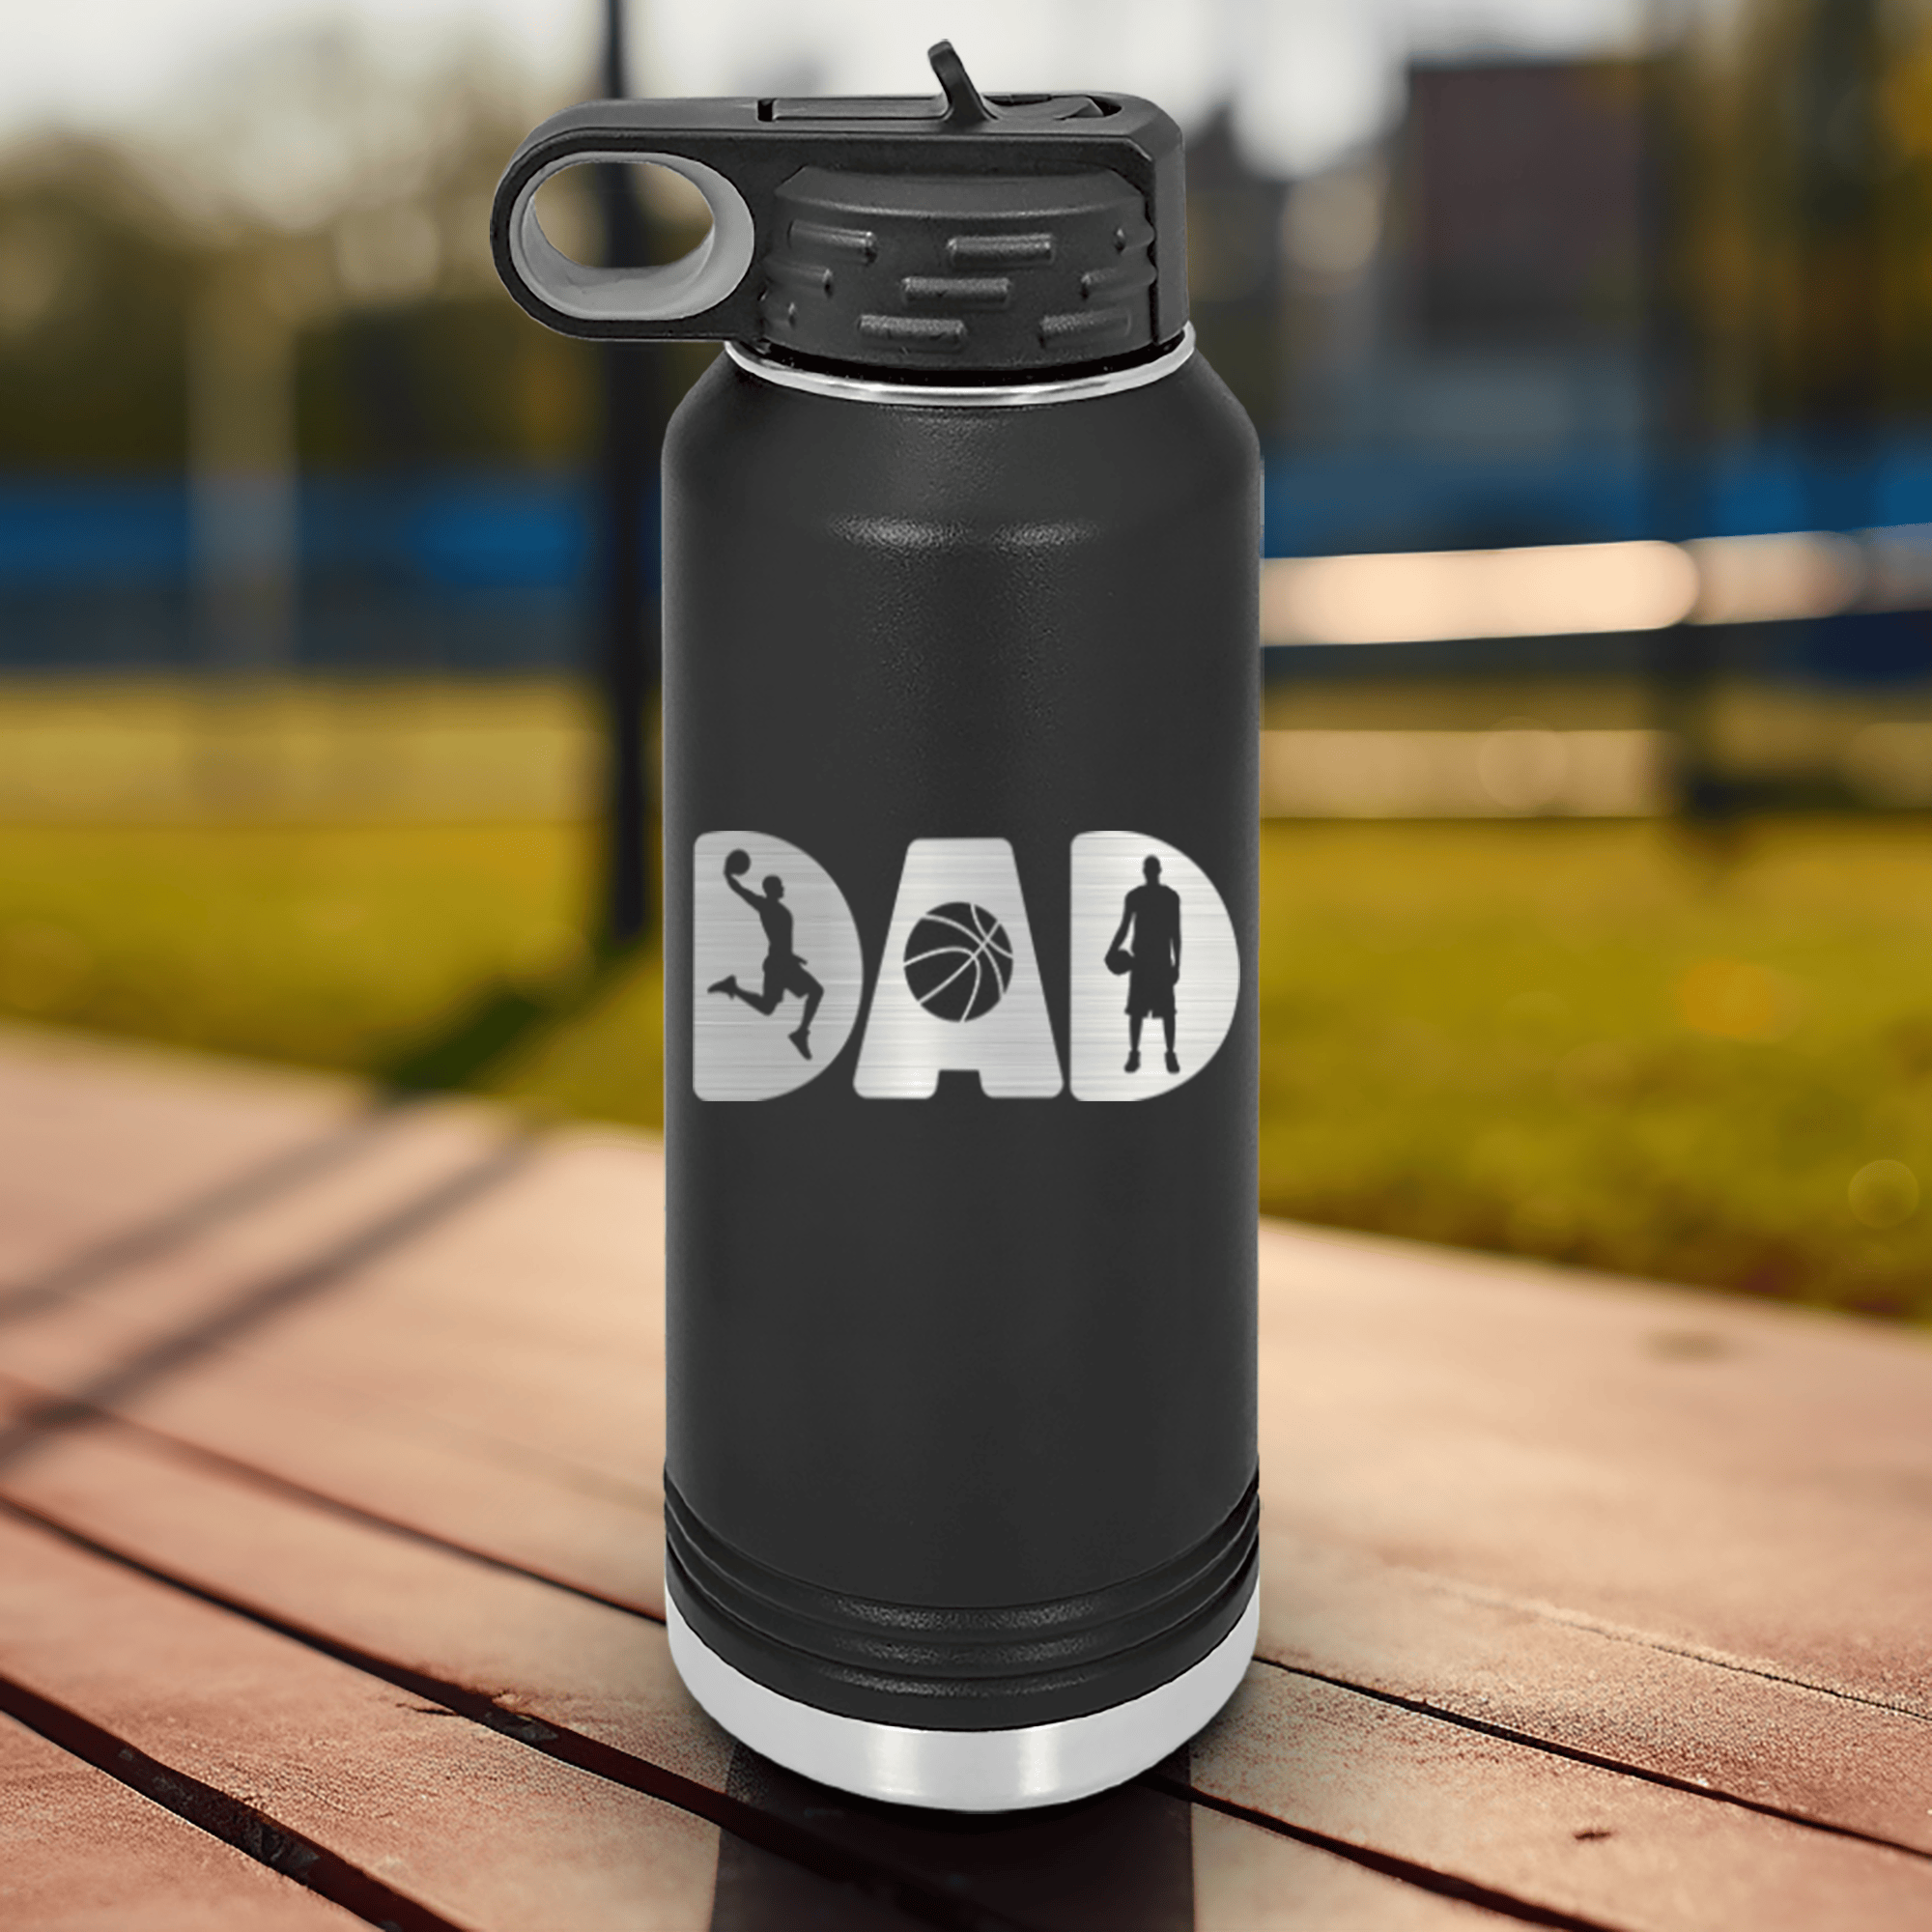 Black Basketball Water Bottle With Basketball Dads Statement Design